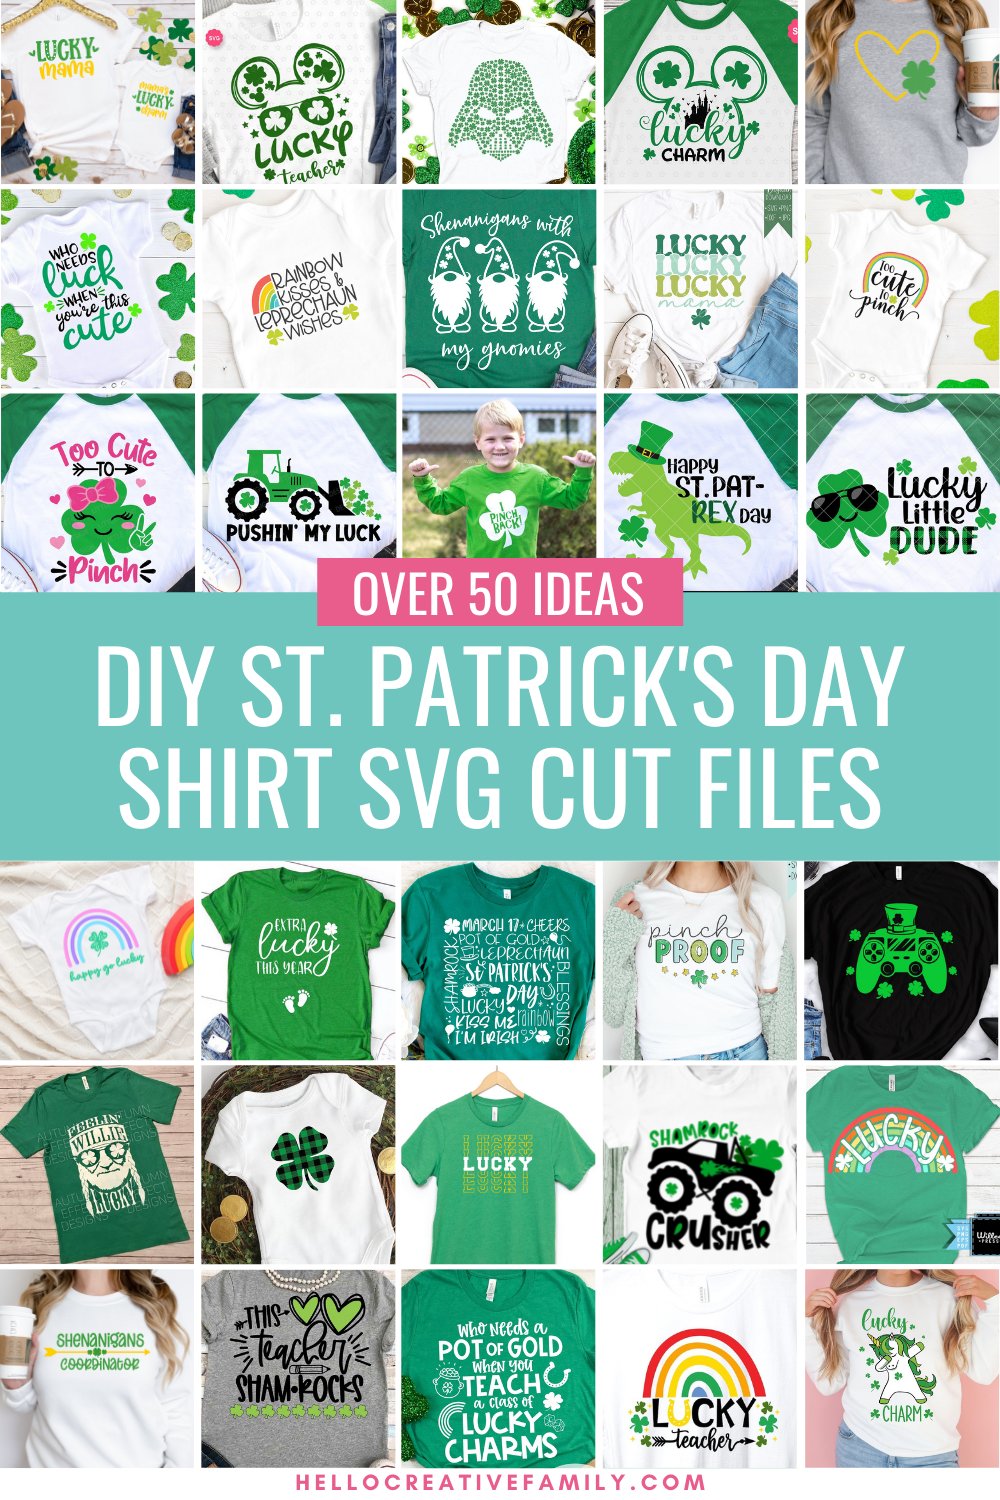 St. Patrick’s Day is just around the corner, and if you’re looking for new ideas, you’ve come to the right place! Check out this list of 50+ easy DIY St. Patrick’s Day shirt ideas. We're sharing a ton of St. Patrick's Day SVG files to help make your family pinch proof using your Cricut or Silhouette cutting machines! We've got St Patrick's Day Shirt Ideas for teachers, kids, families, moms, dads and so much more!